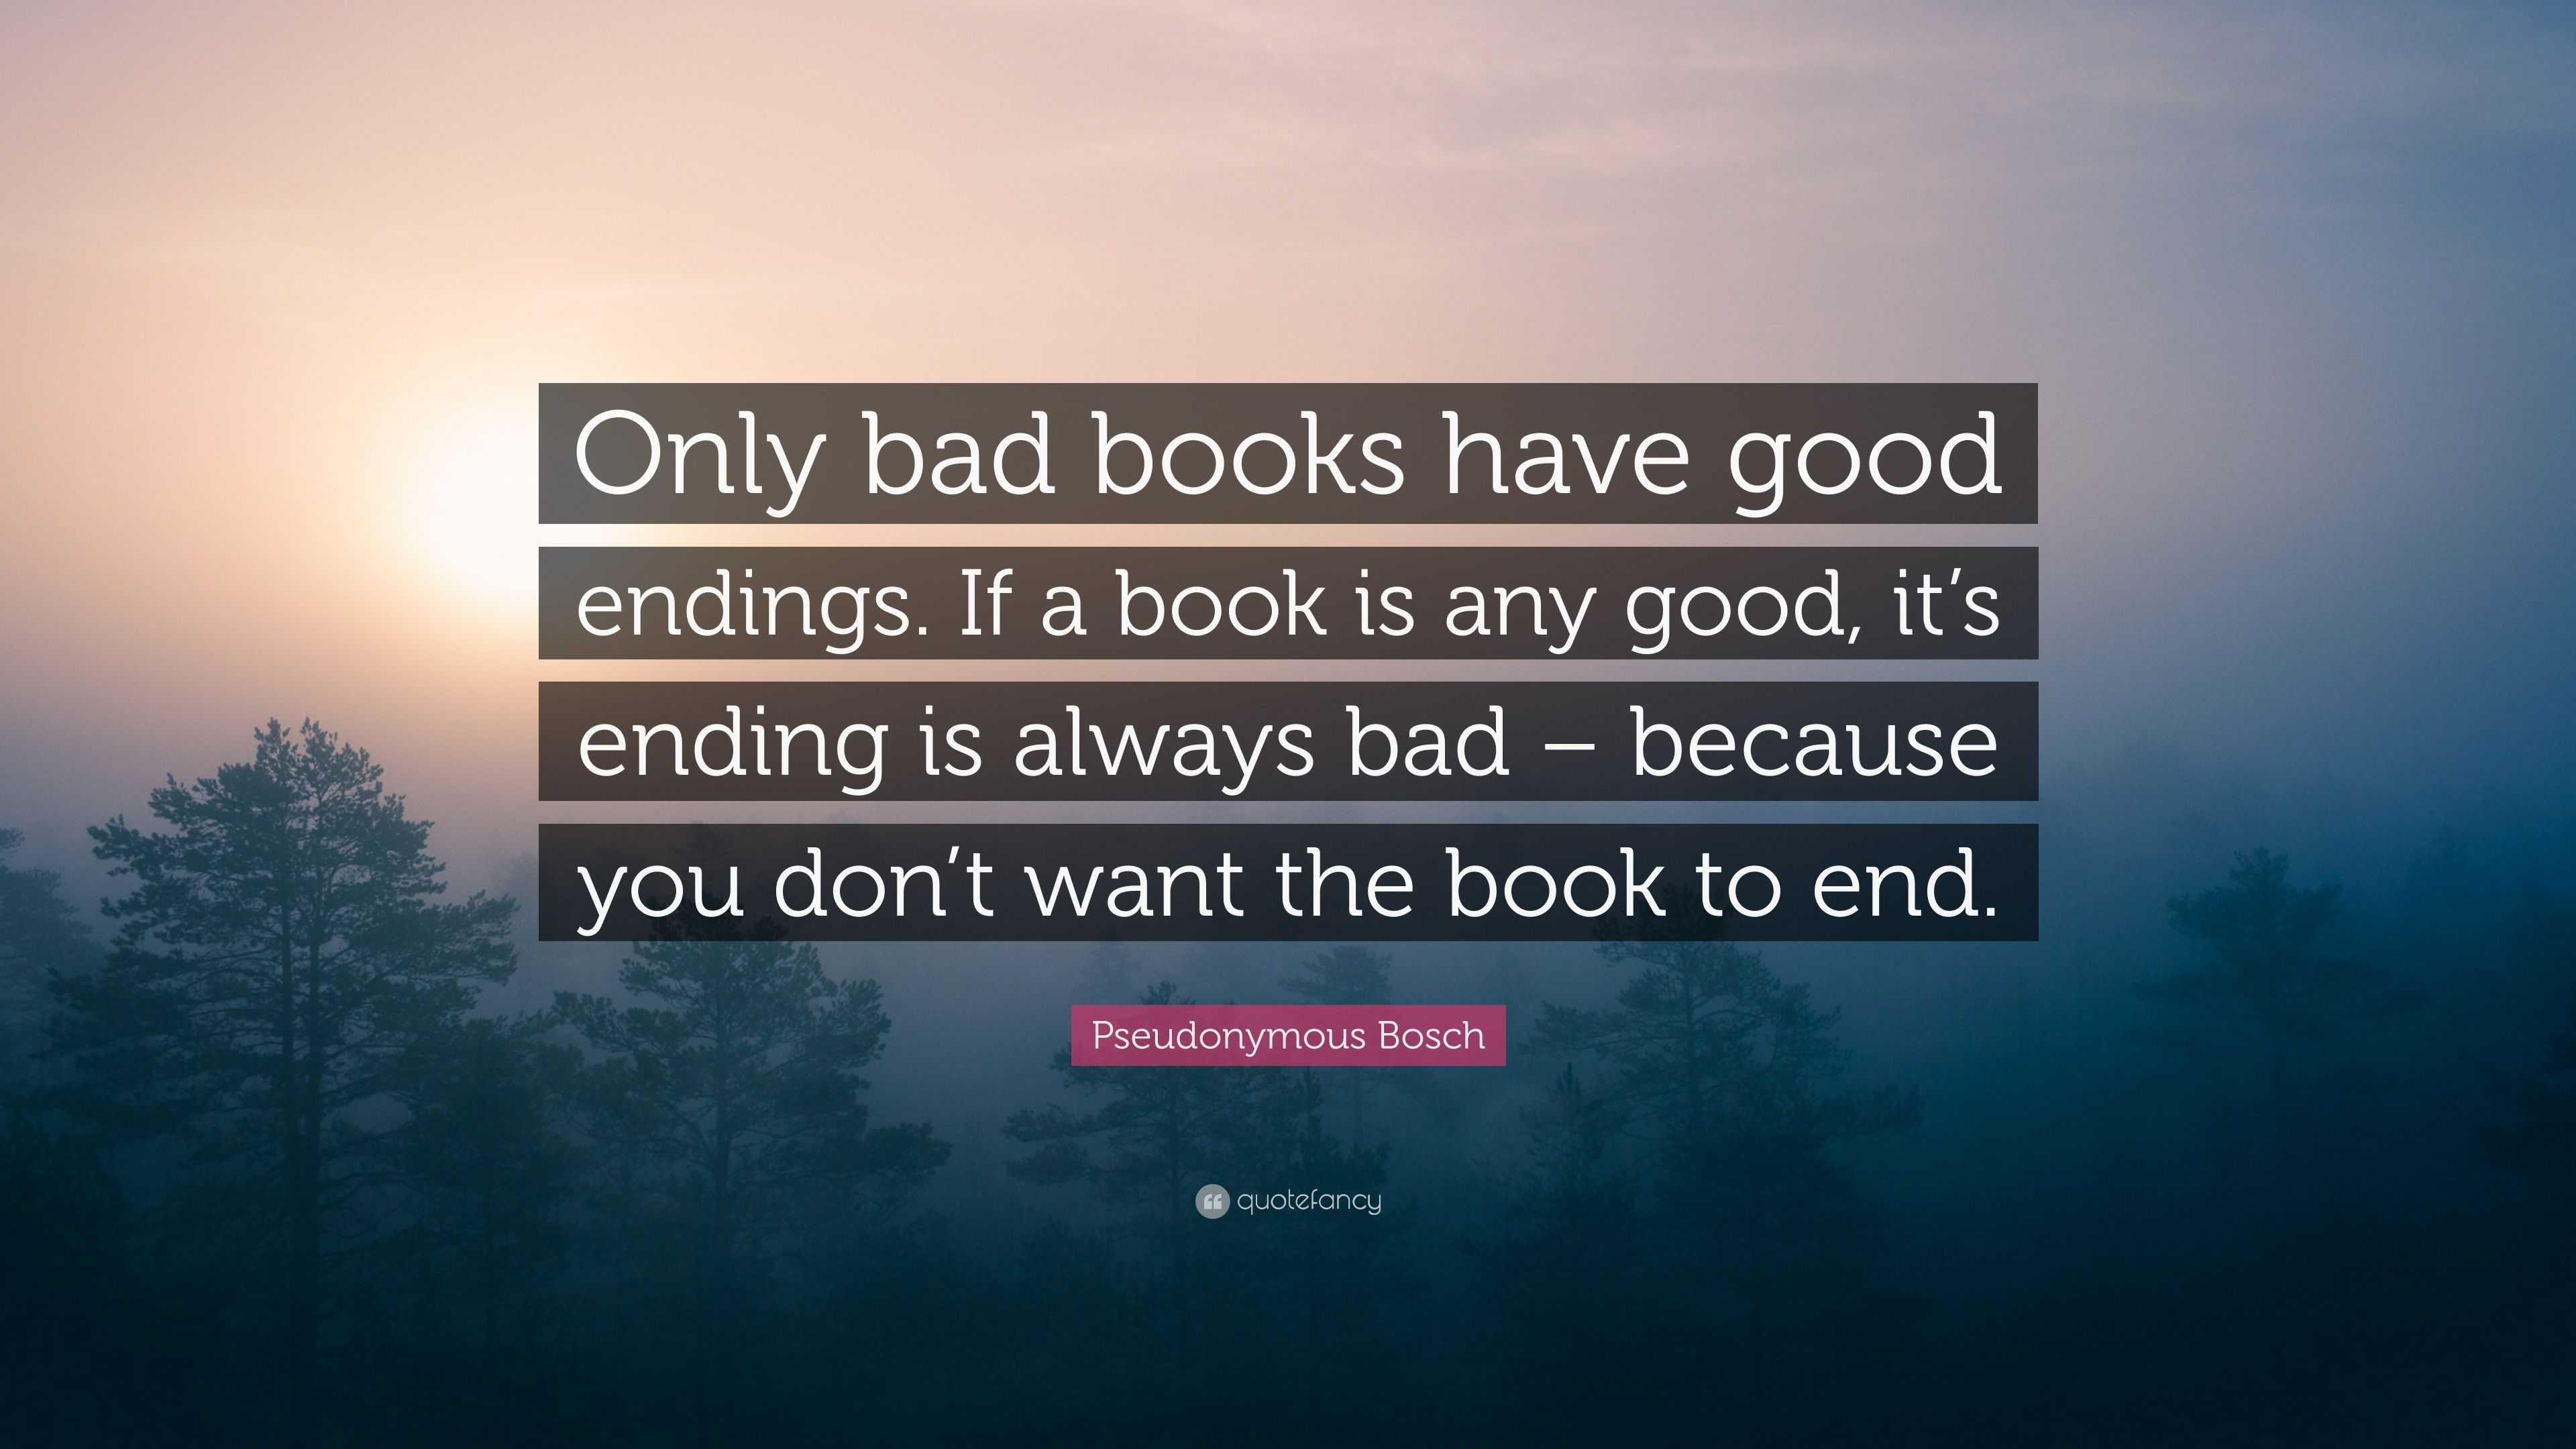 Pseudonymous Bosch Quote: “Only bad books have good endings. If a book